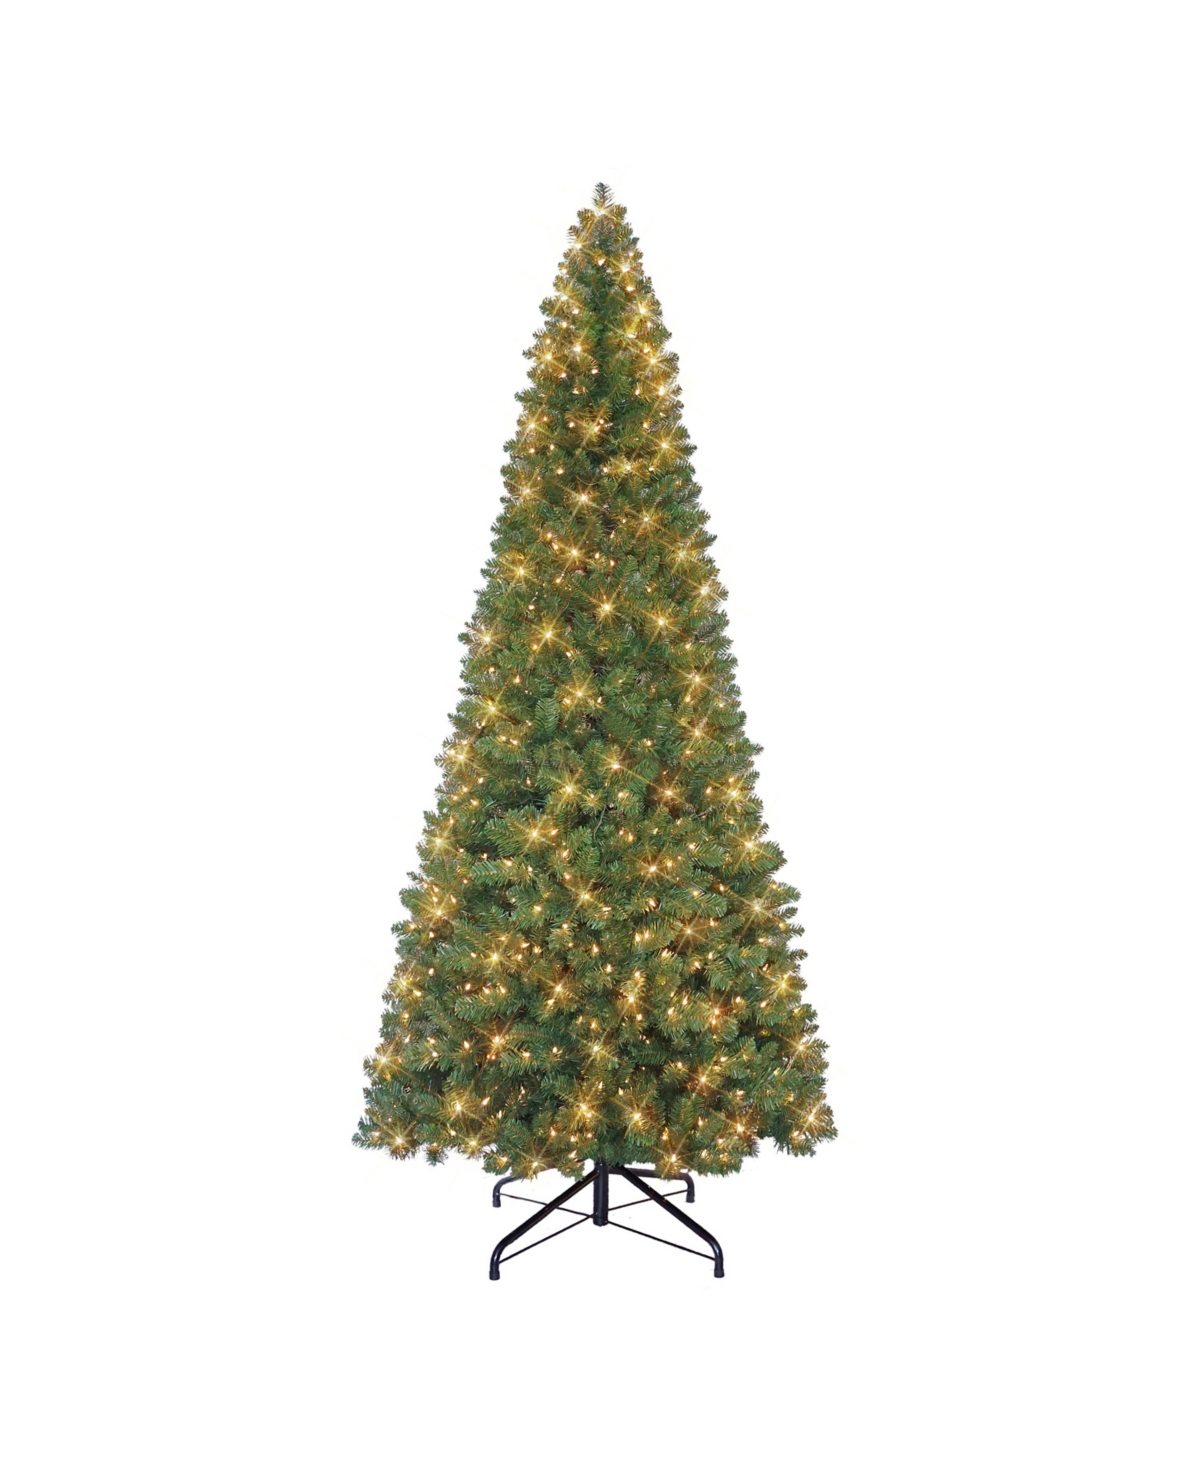 Puleo 9' Pre-lit Virginia Pine Tree With 700 Underwriters Laboratories Clear Incandescent Lights, 1588 Tip In Green